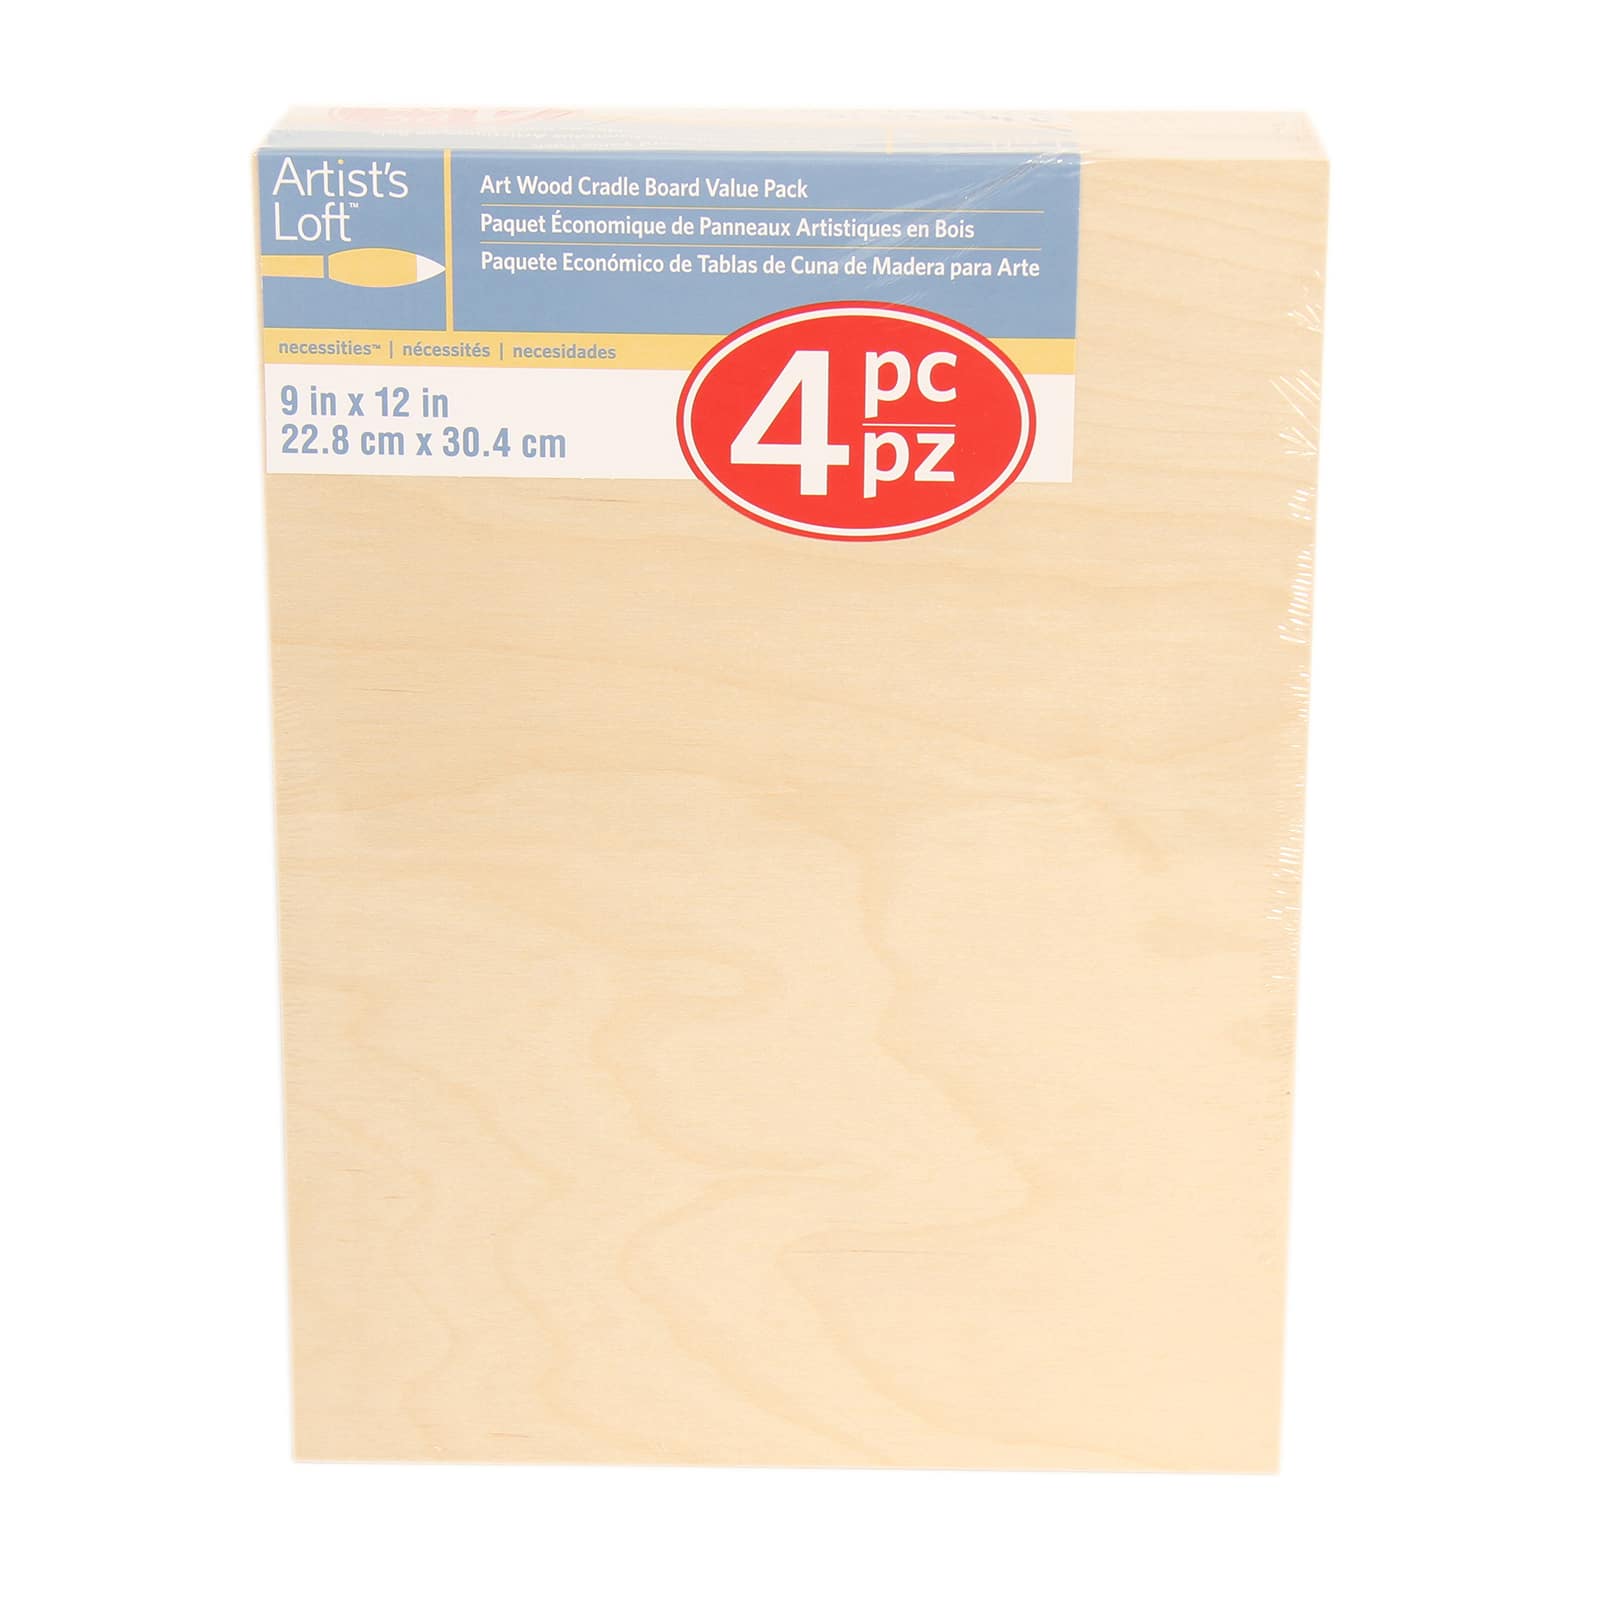 Aspire Art Boards Multiple Sizes Pack of 1 6 x 8, HDF Board / Value Series Gessoed Wood Panel for Painting 1/8 Depth 